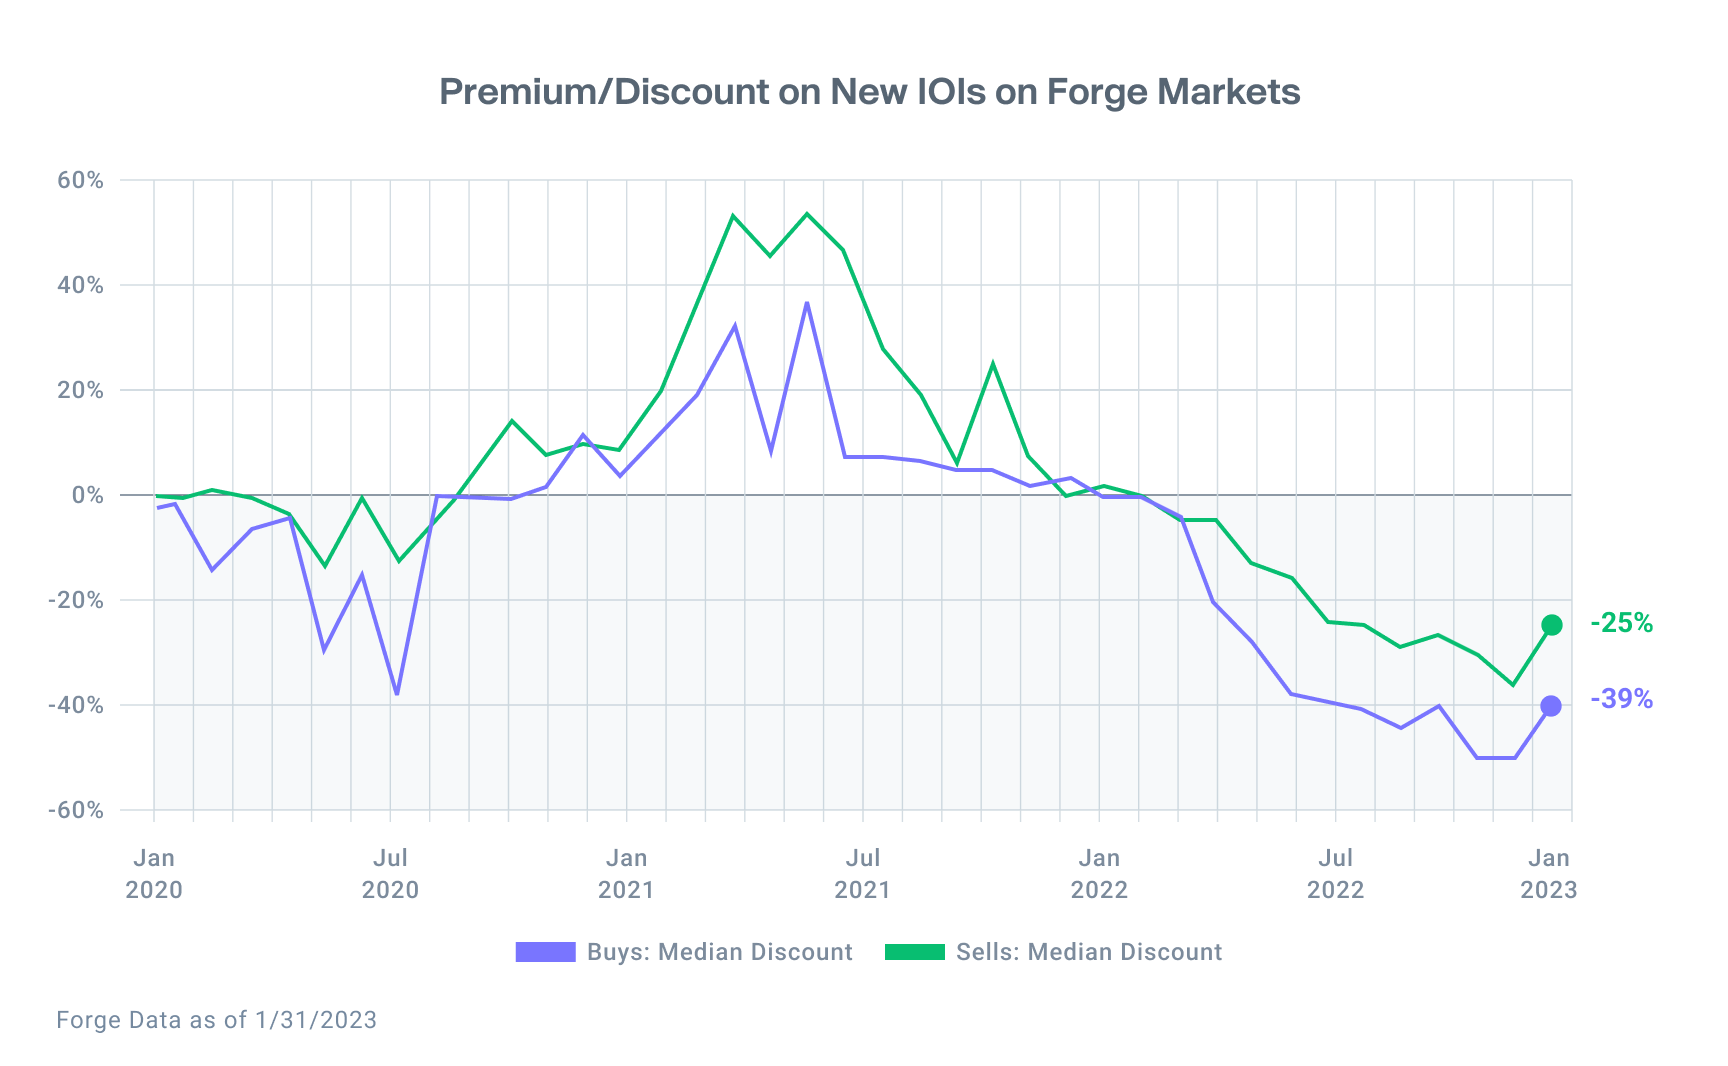 Line chart shows Buys and Sells median discount trends on New IOIs since 2020